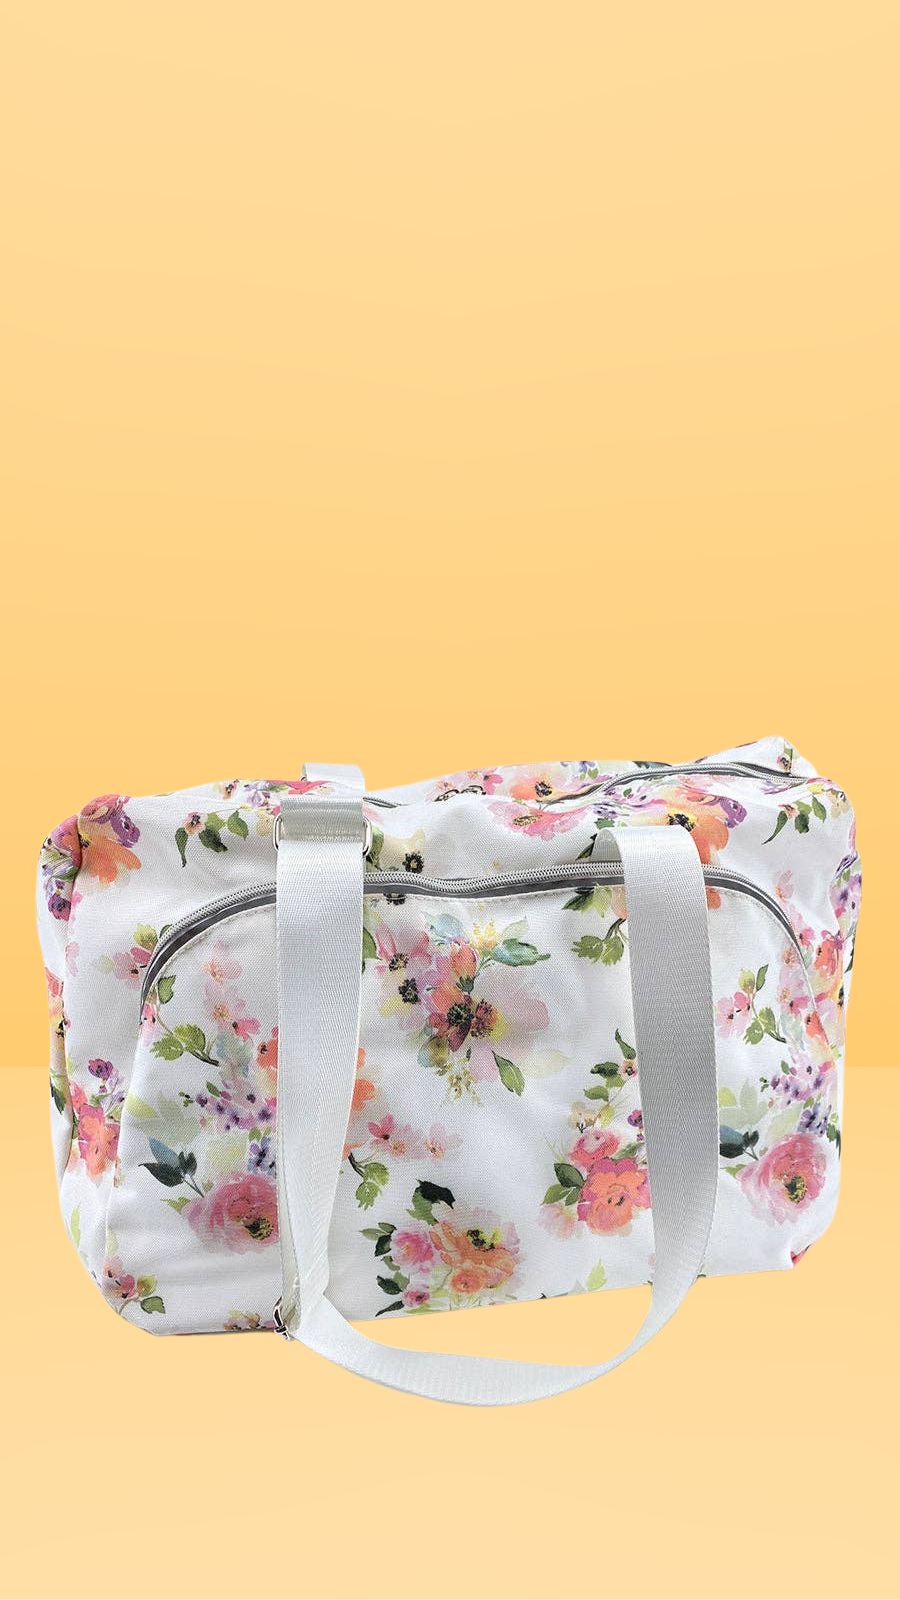 Young Spirit Canvas Weekend Duffle Bag: Travel in style with our Young Spirit Weekend Duffle Bag. This lightweight, floral print duffle bag is perfect as a dance bag, gym bag, sports bag, weekender bag, sl - Ciao Bella Dresses 